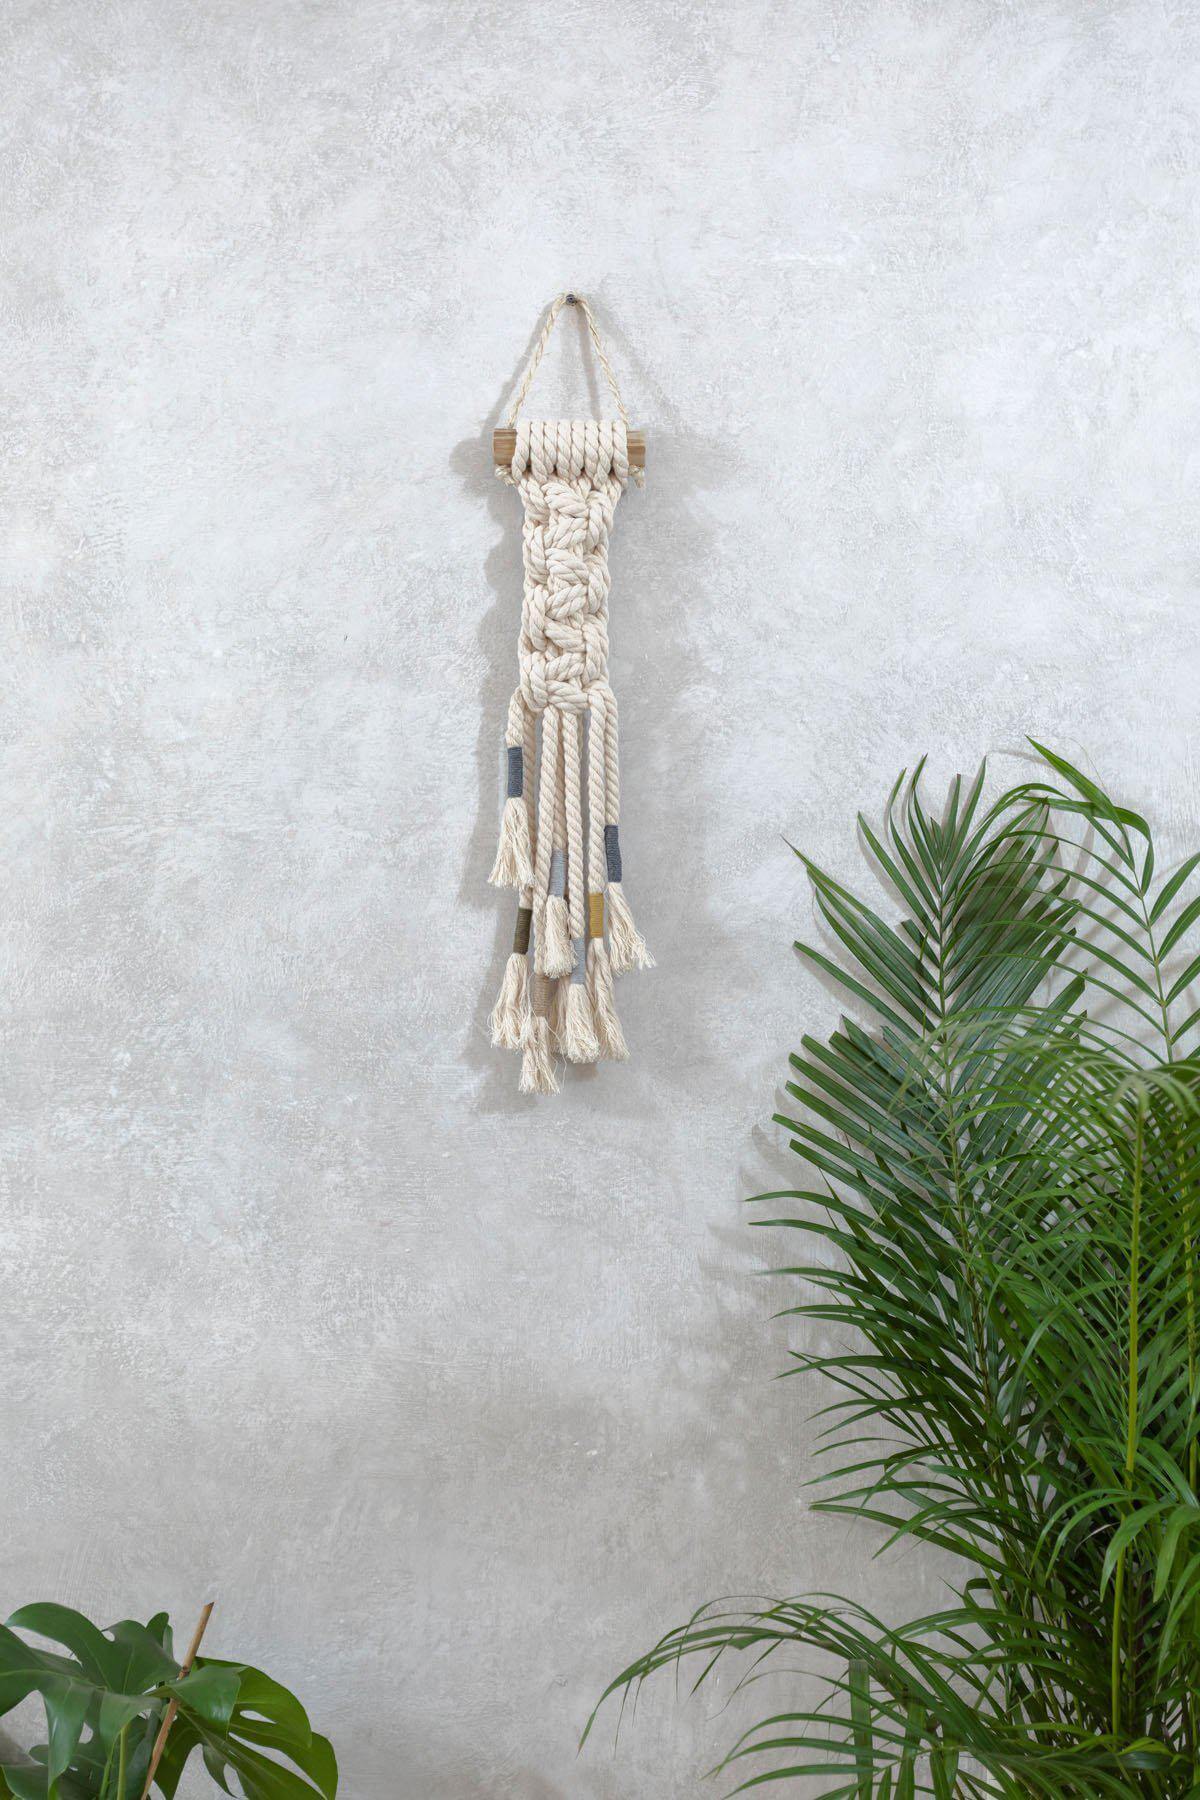 Macrame Wall Hangings Are The Trendy Home Purchase Everyone's Talking About